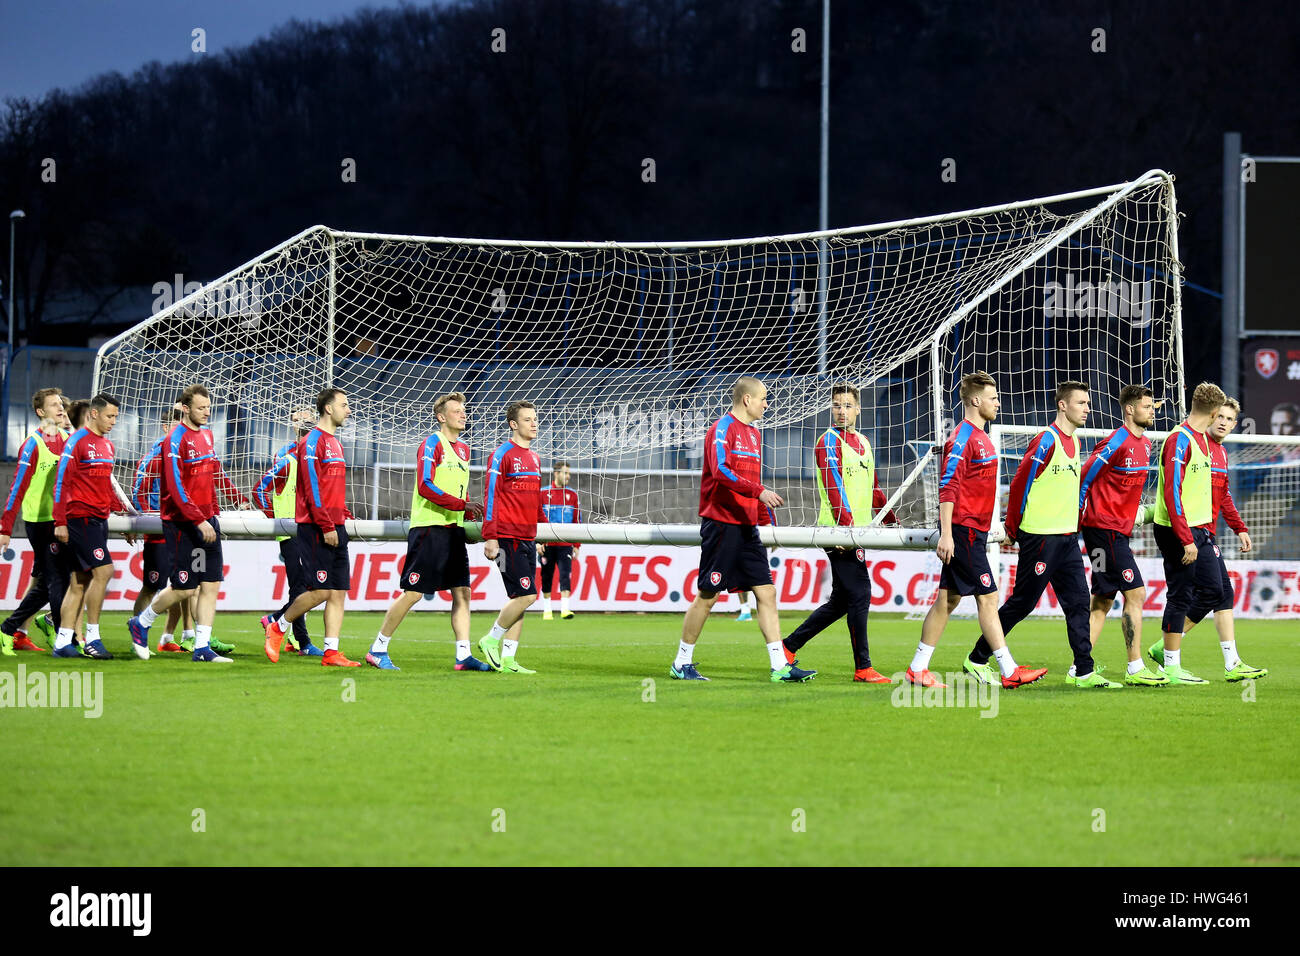 Usti Nad Labem, Czech Republic. 21st Mar, 2017. Czech national football team players in action during the training session in Usti nad Labem, Czech Republic, March 21, 2017 prior to the friendly with Lithuania on Wednesday and qualifier for the World Championship between Czech Republic and San Marino on Sunday, March 26, 2017. CTK Photo/Ondrej Hajek) Stock Photo